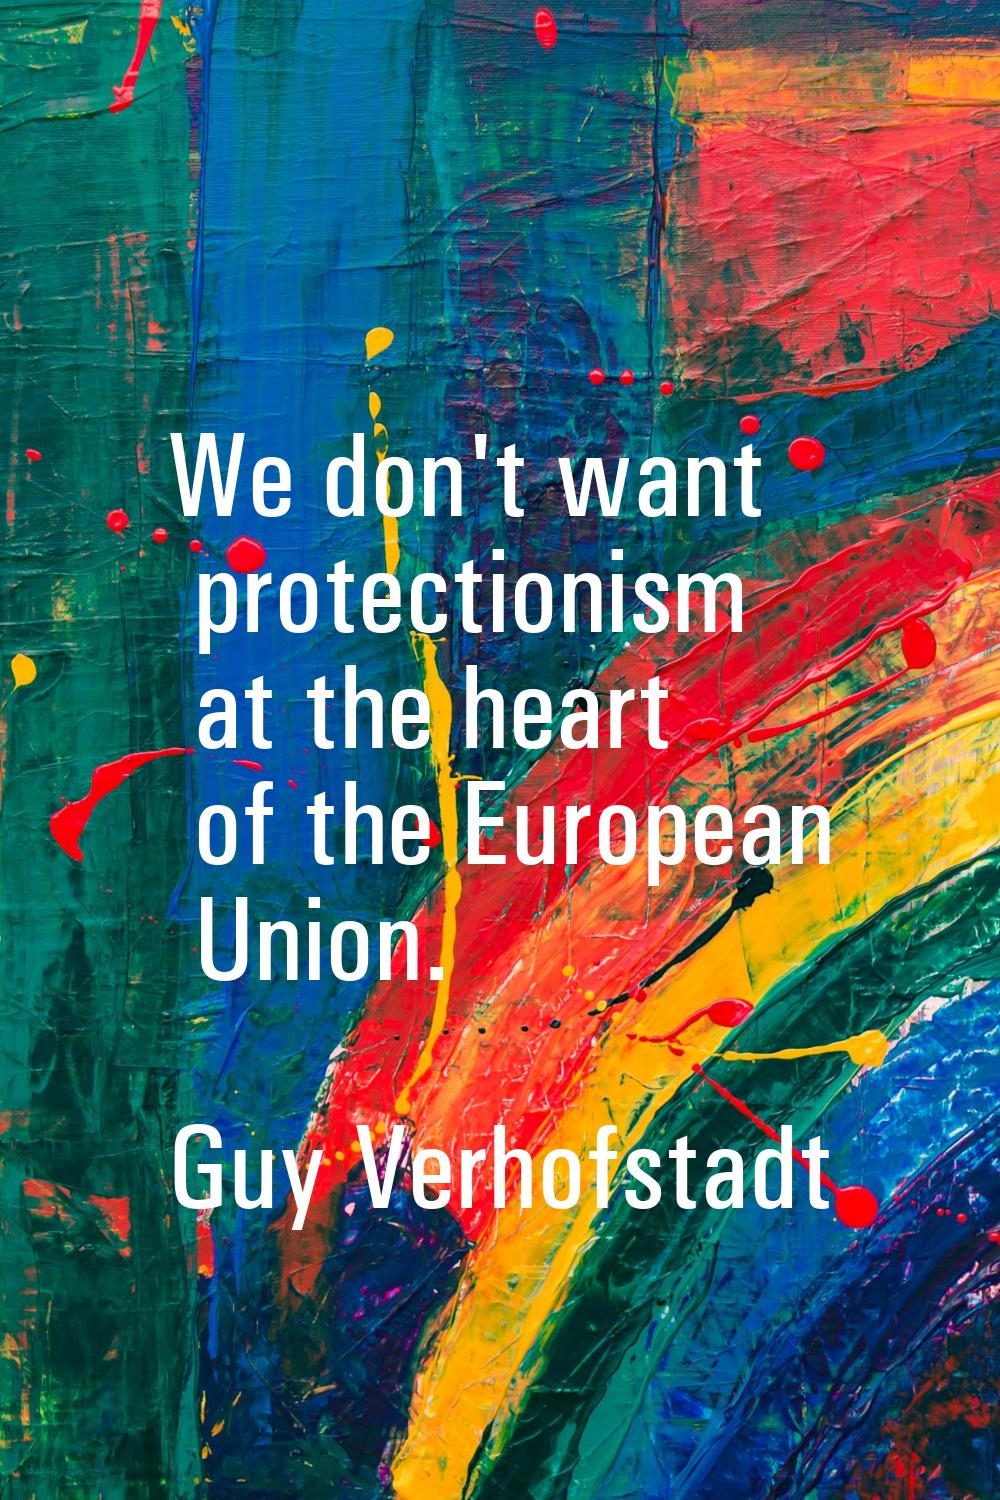 We don't want protectionism at the heart of the European Union.